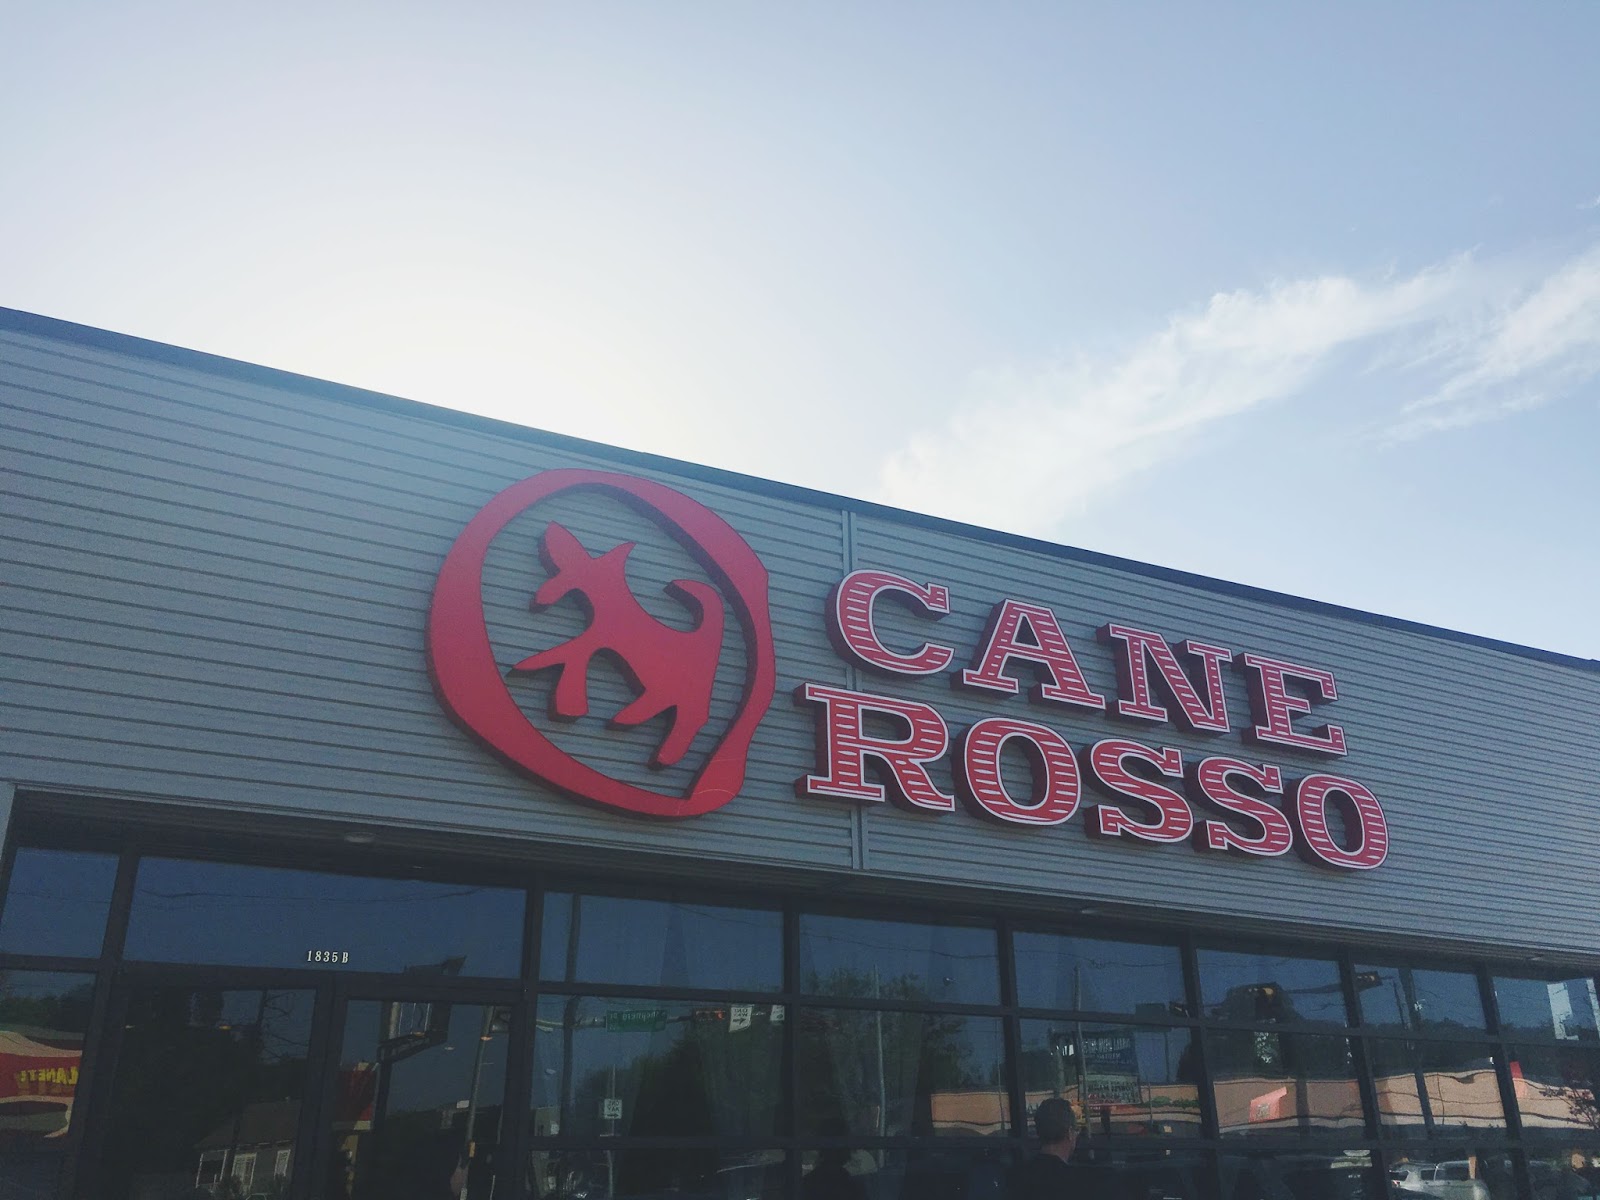 Cane Rosso - A restaurant in Houston, Texas